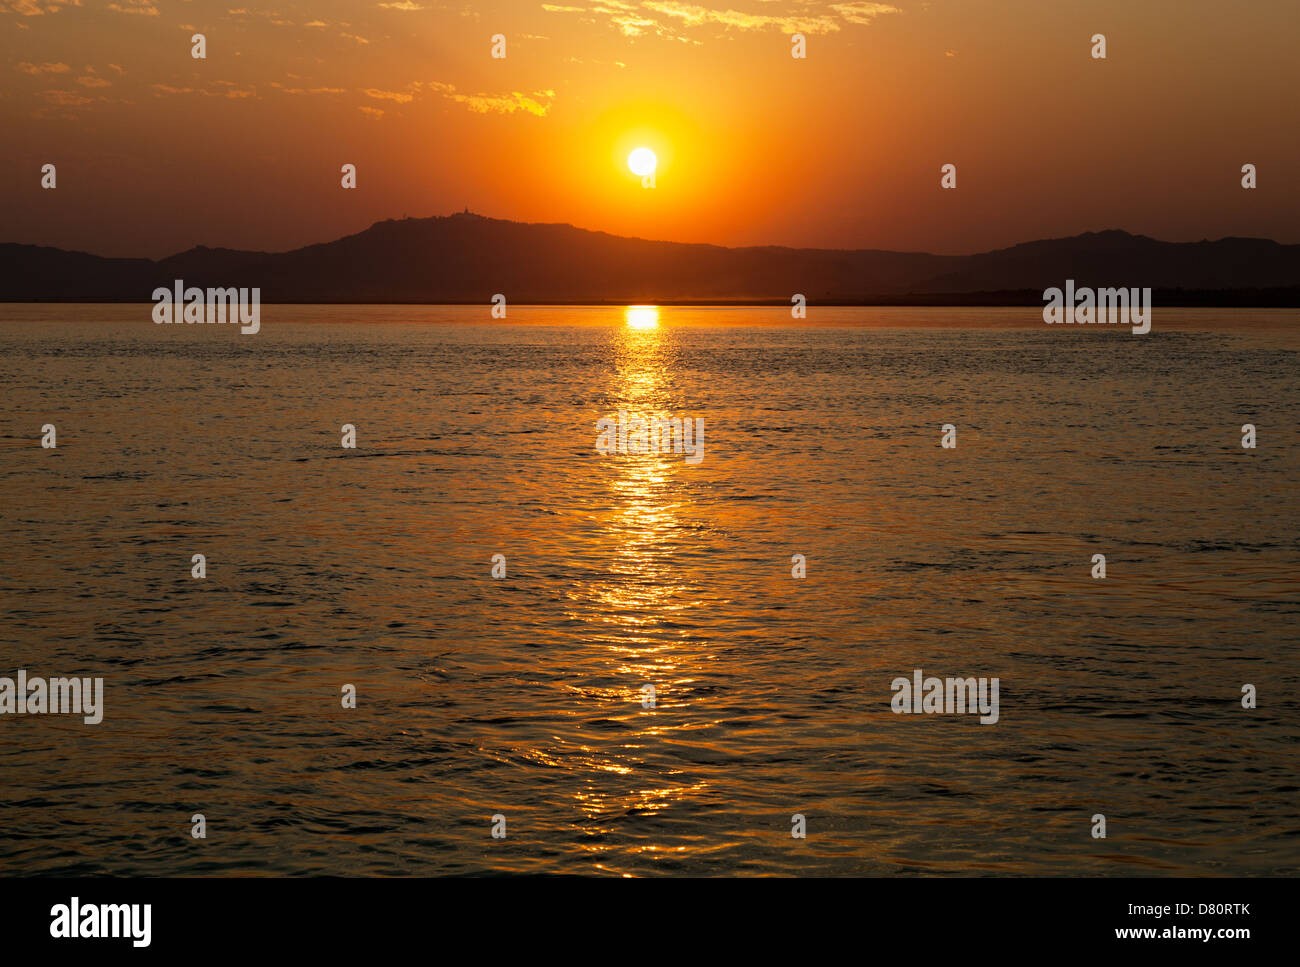 Sunset over the Irrawaddy River at Mandalay, Myanmar 7 Stock Photo